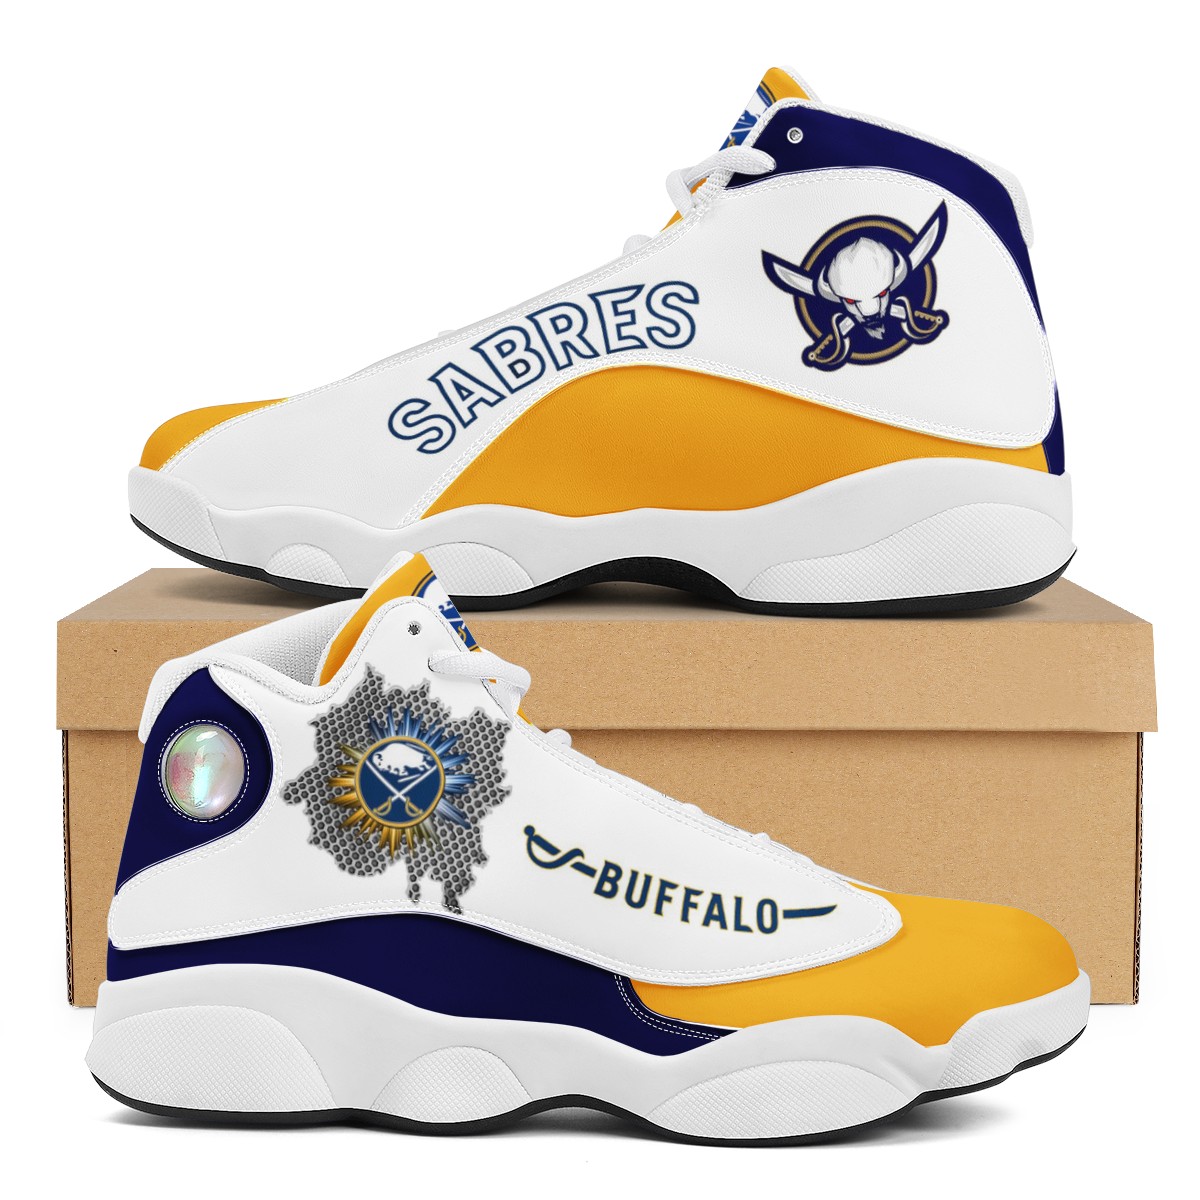 Men's Buffalo Sabres Limited Edition JD13 Sneakers 001